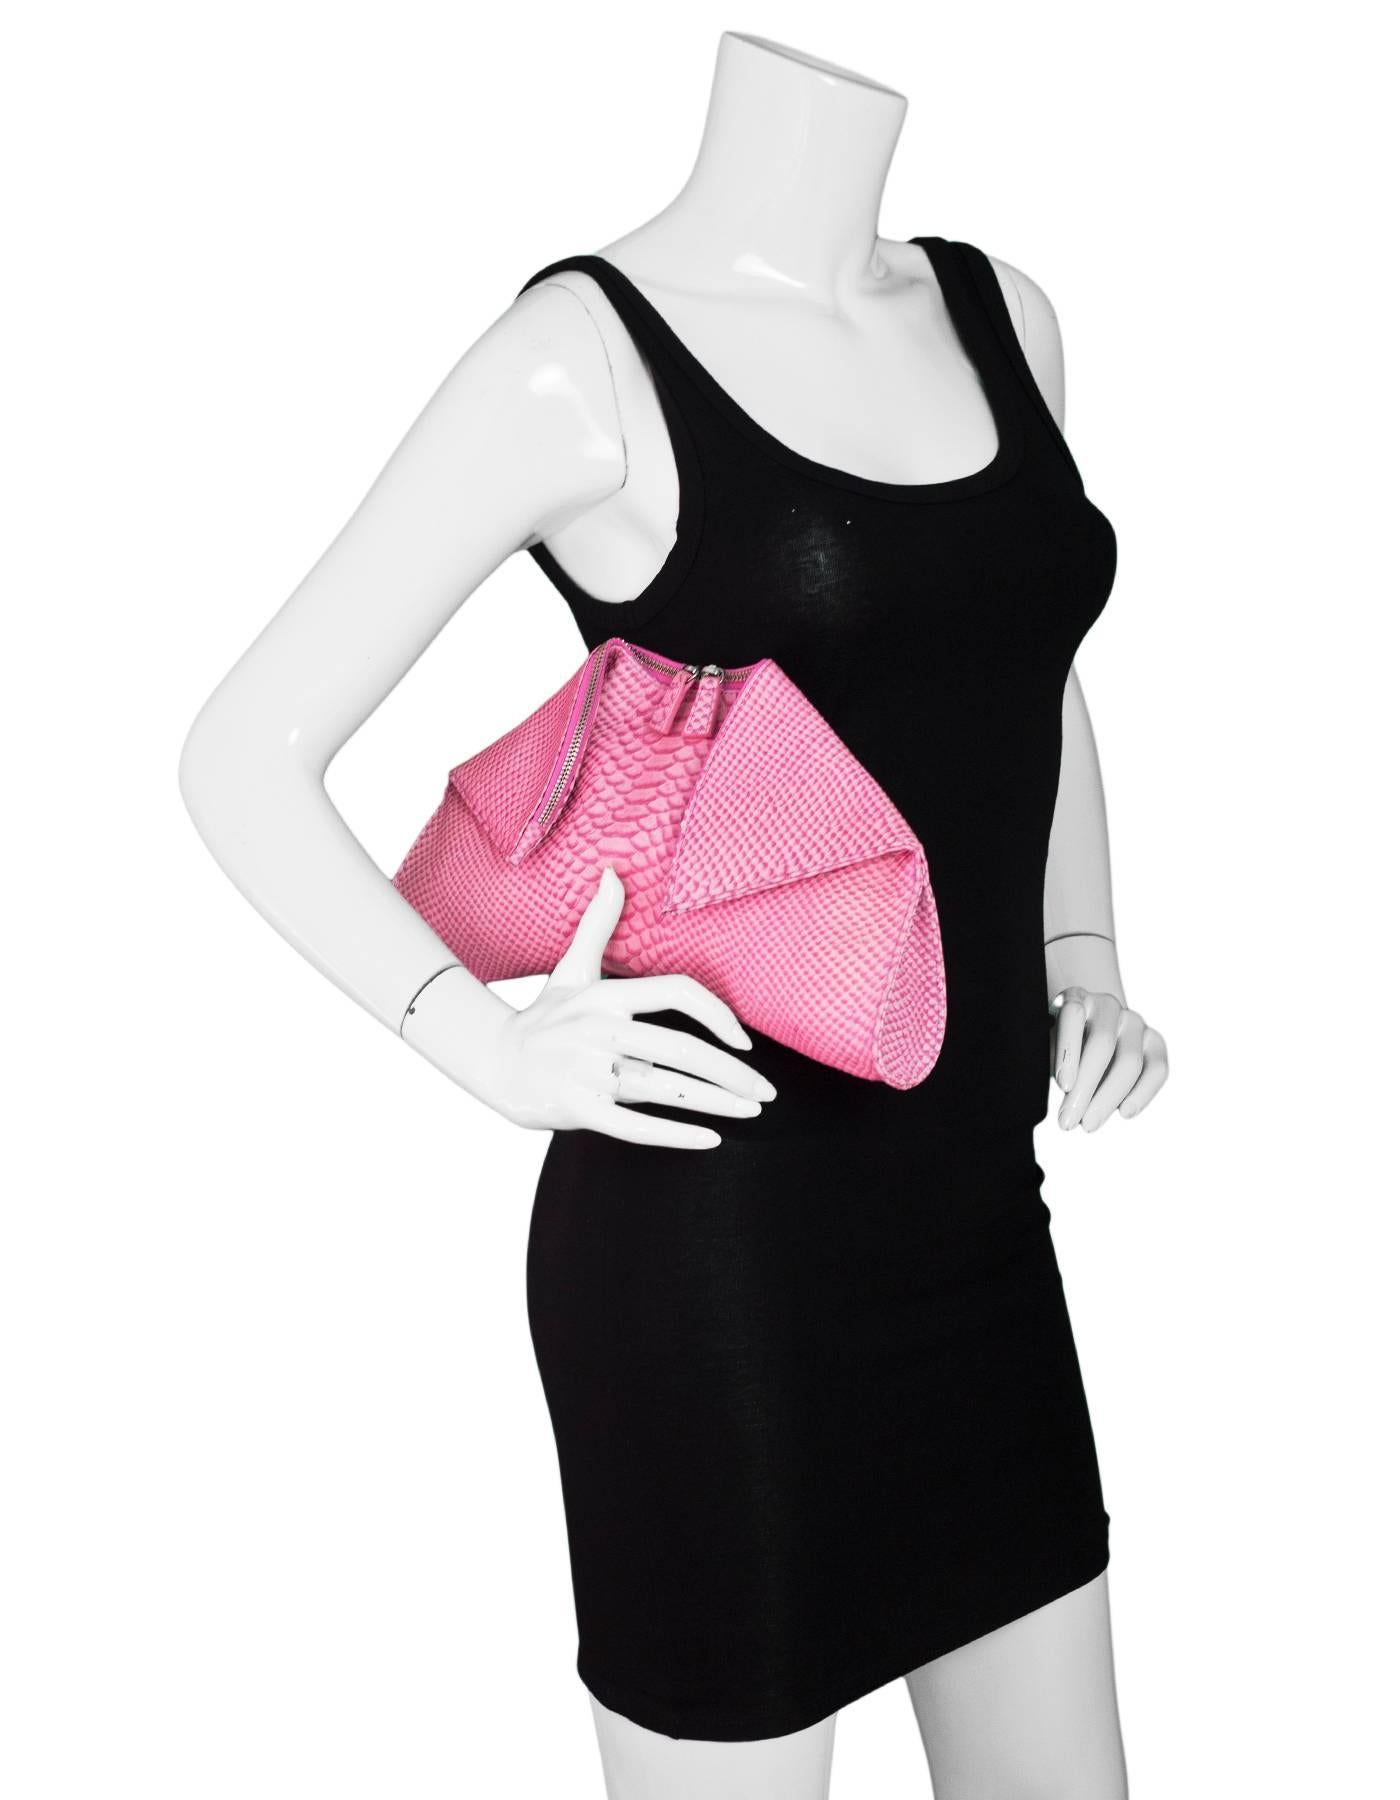 Emily Cho Pink Embossed Snakeskin Folded Clutch

Made In: China
Color: Pink
Hardware: Silvertone
Materials: Embossed leather, metal
Lining: Pink textile
Closure/Opening: Fold-over sides with double zip top
Exterior Pockets: None
Interior Pockets: